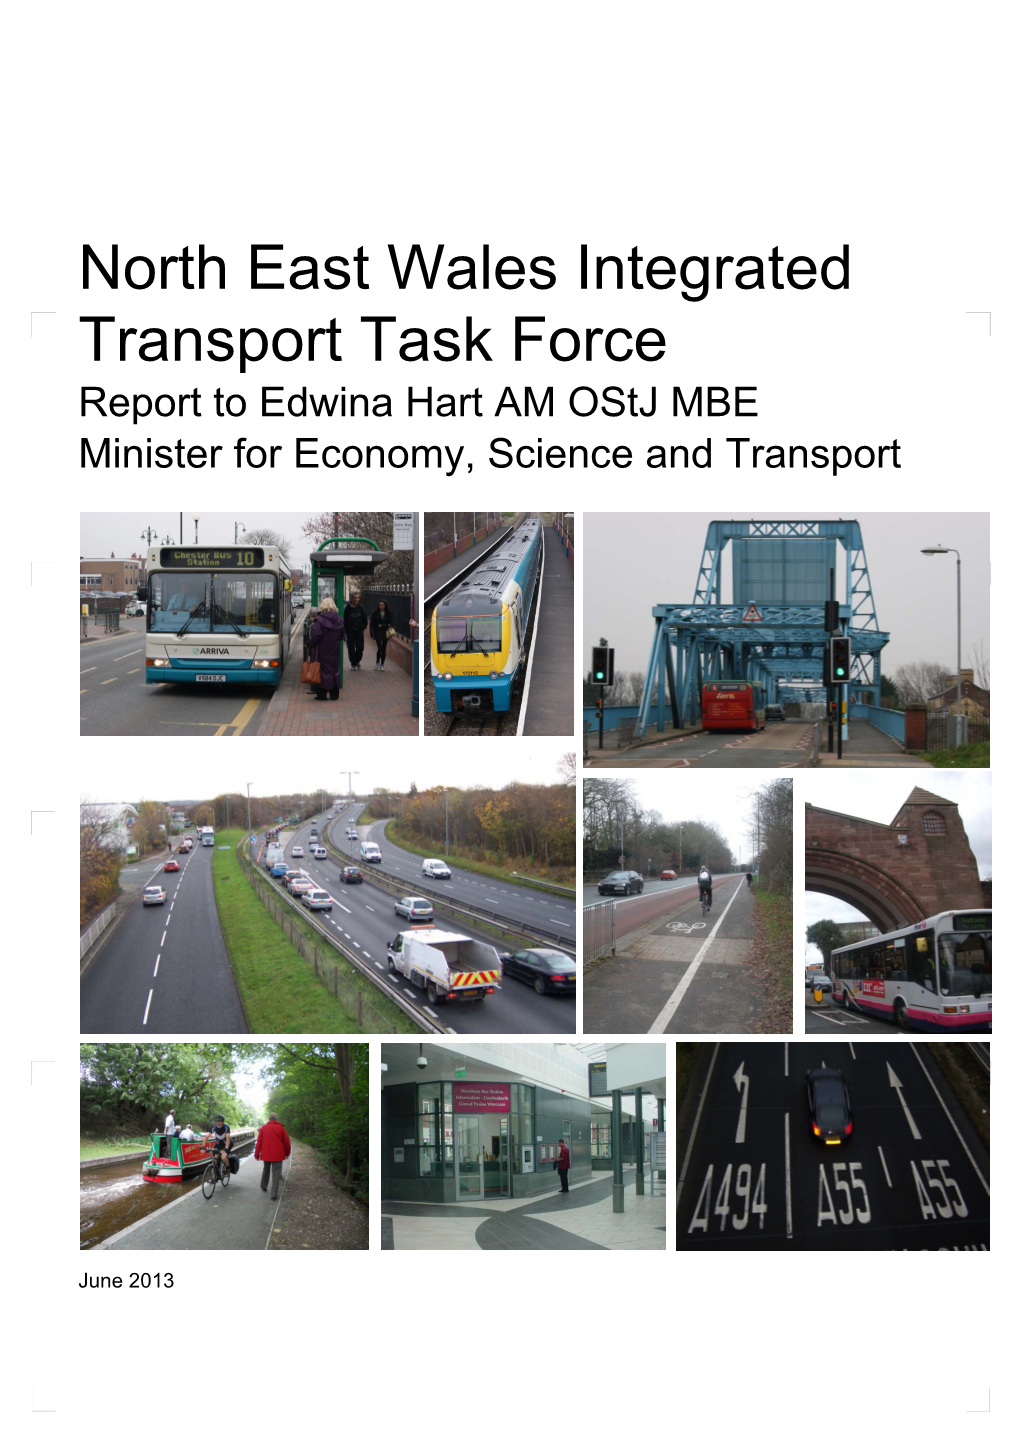 North East Wales Integrated Transport Task Force Report to Edwina Hart AM Ostj MBE Minister for Economy, Science and Transport